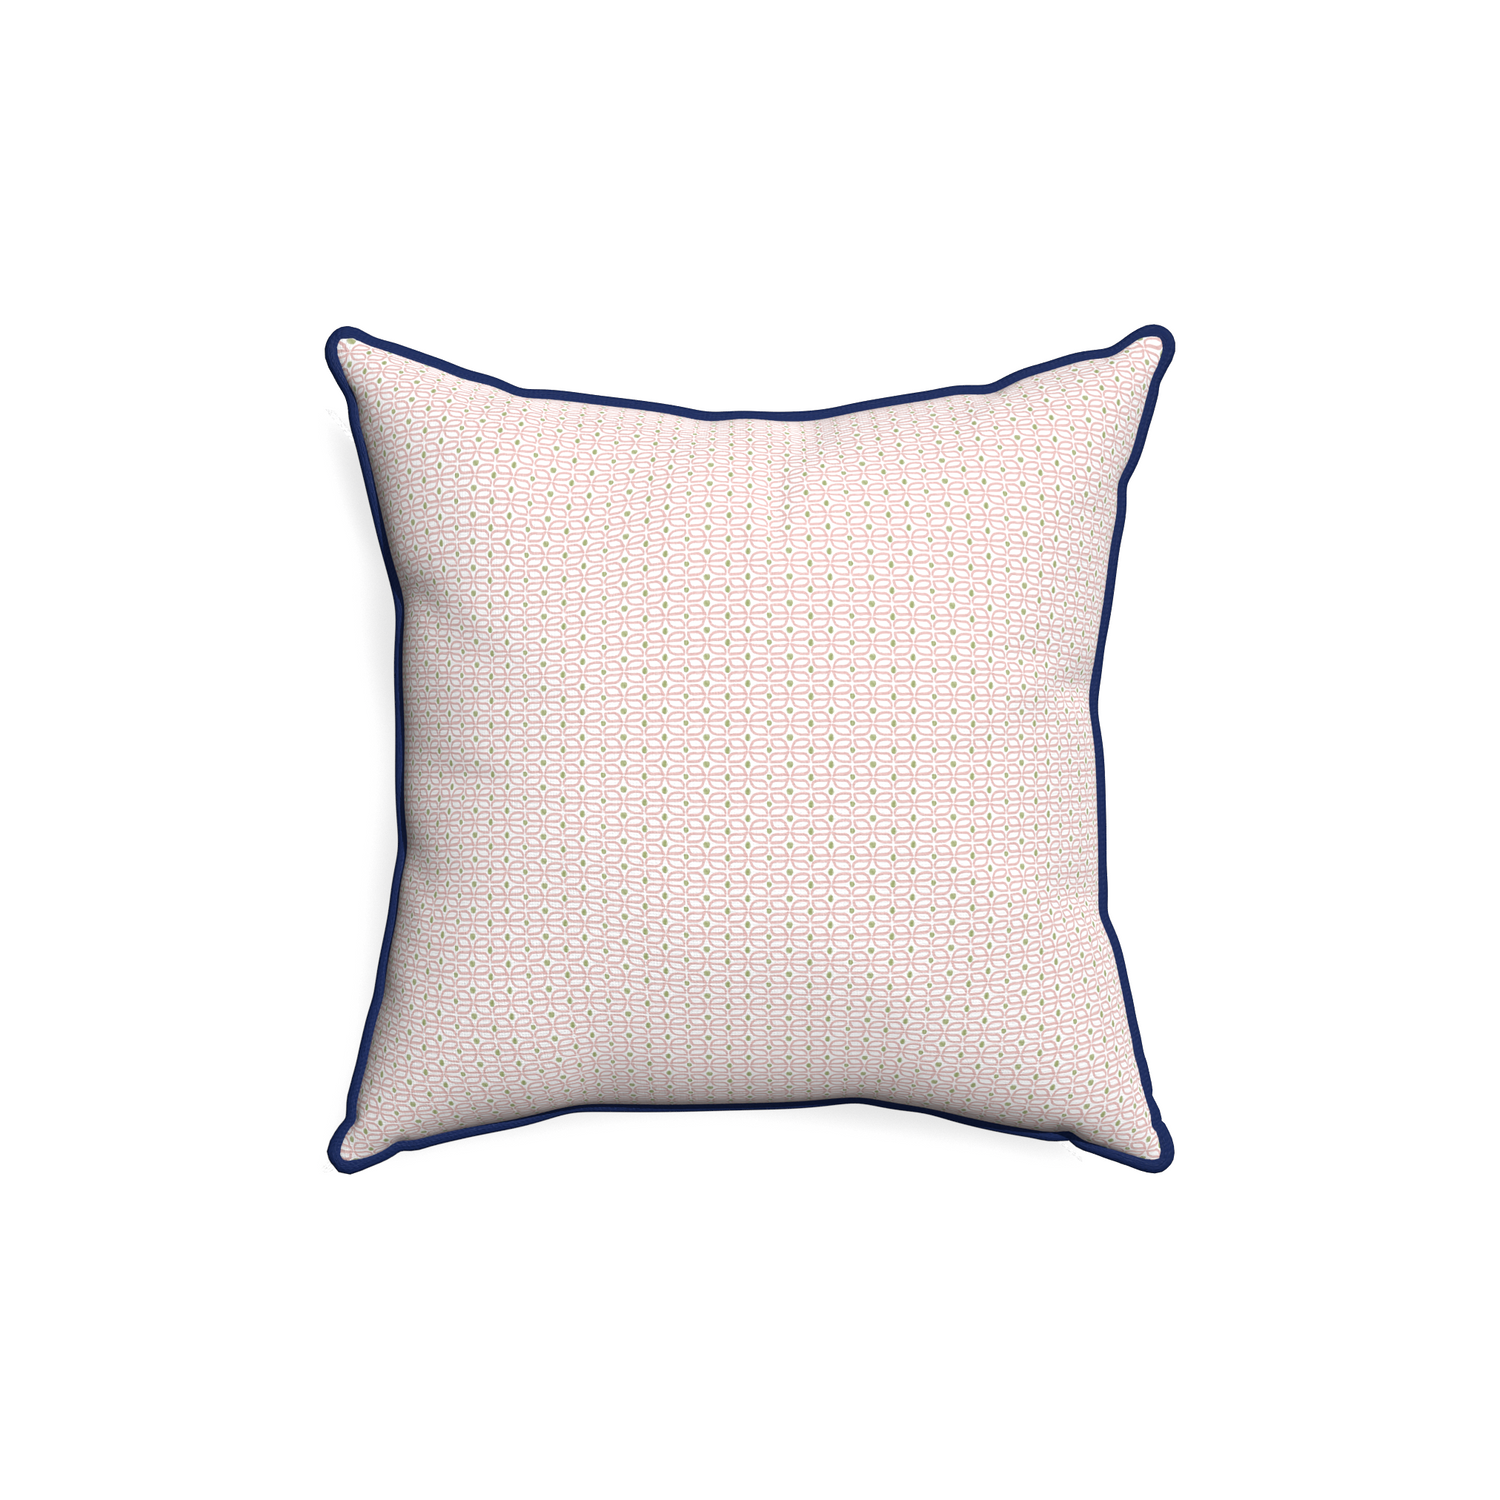 18-square loomi pink custom pillow with midnight piping on white background